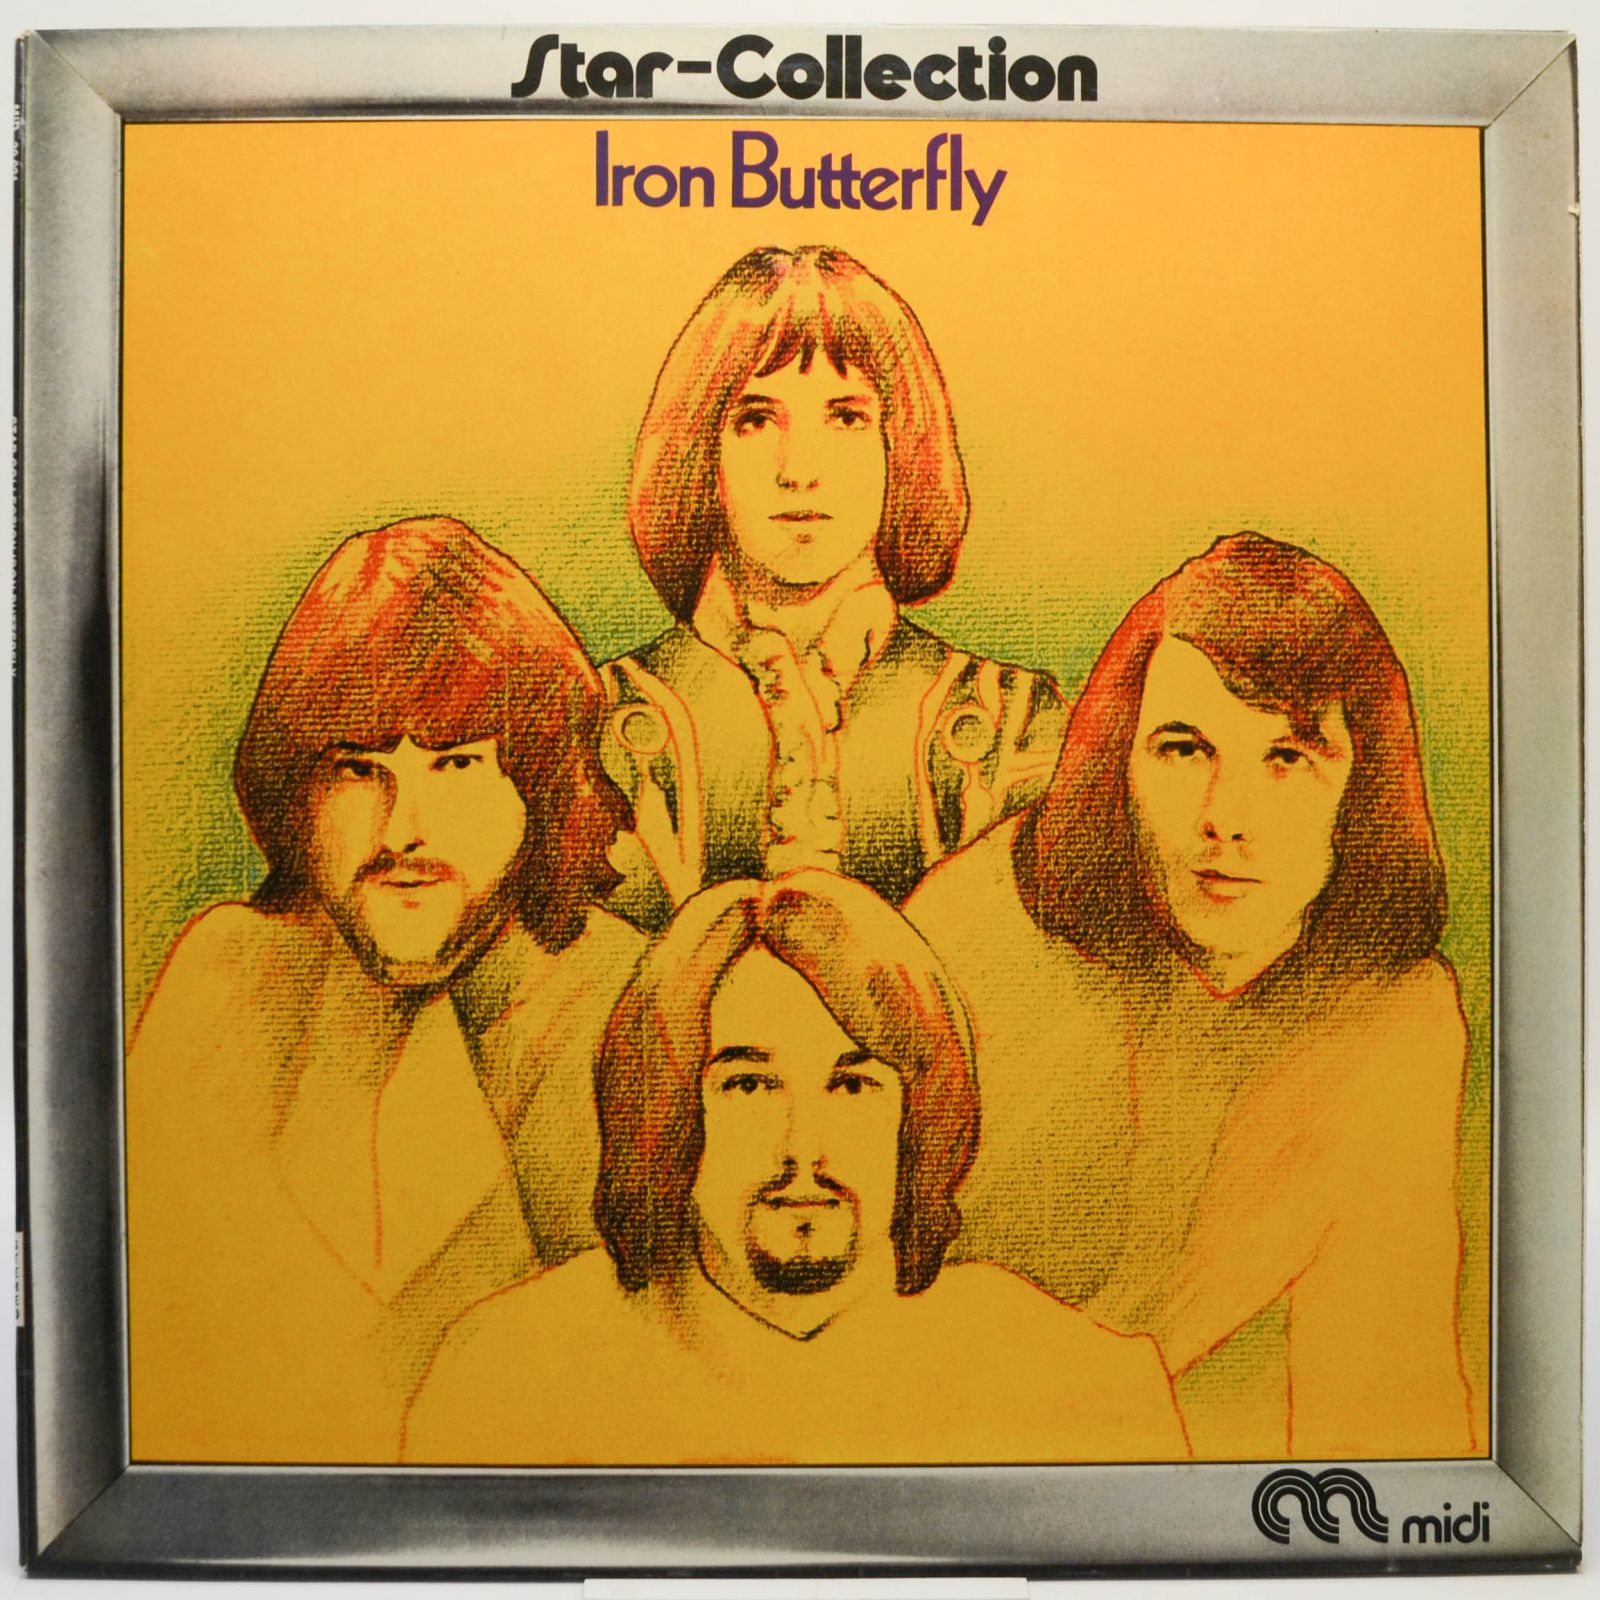 Iron Butterfly — Star-Collection, 1972